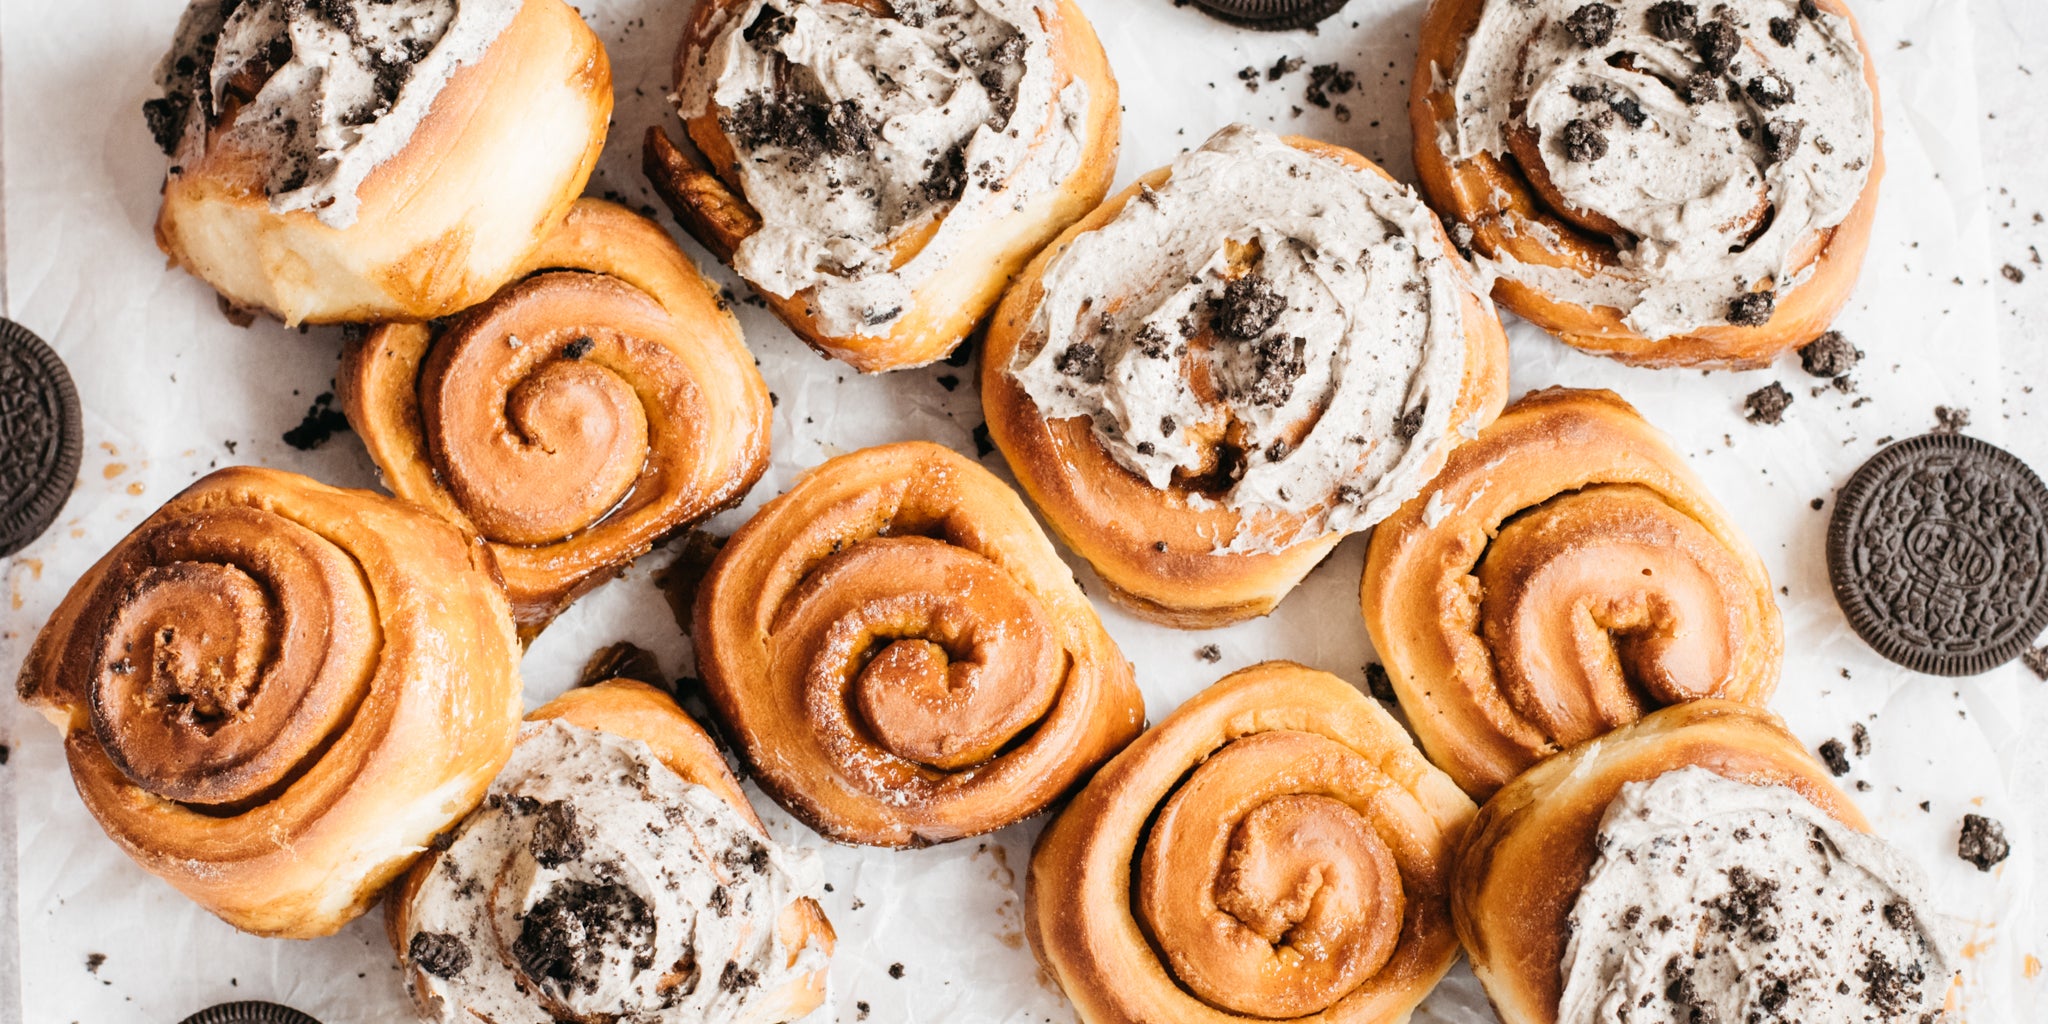 Cinnamon Rolls topped with crumbled Oreo cookies